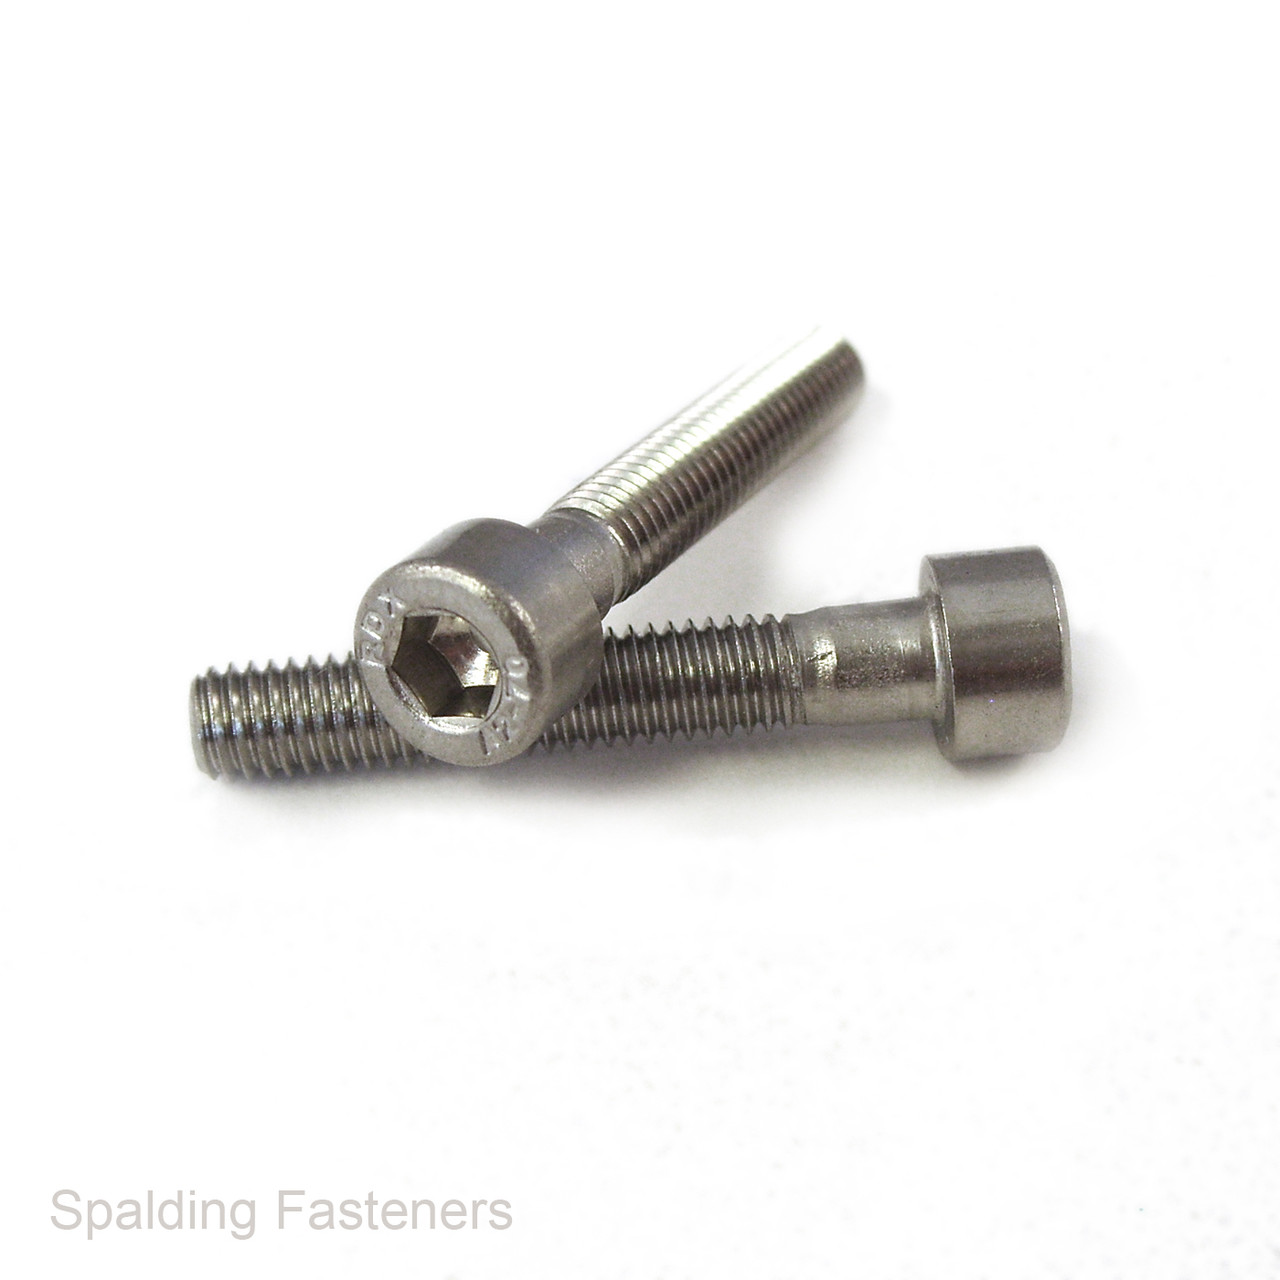 M2 Assorted A2 Stainless Steel Socket Cap Bolts, Nuts And Flat/Spring Washers